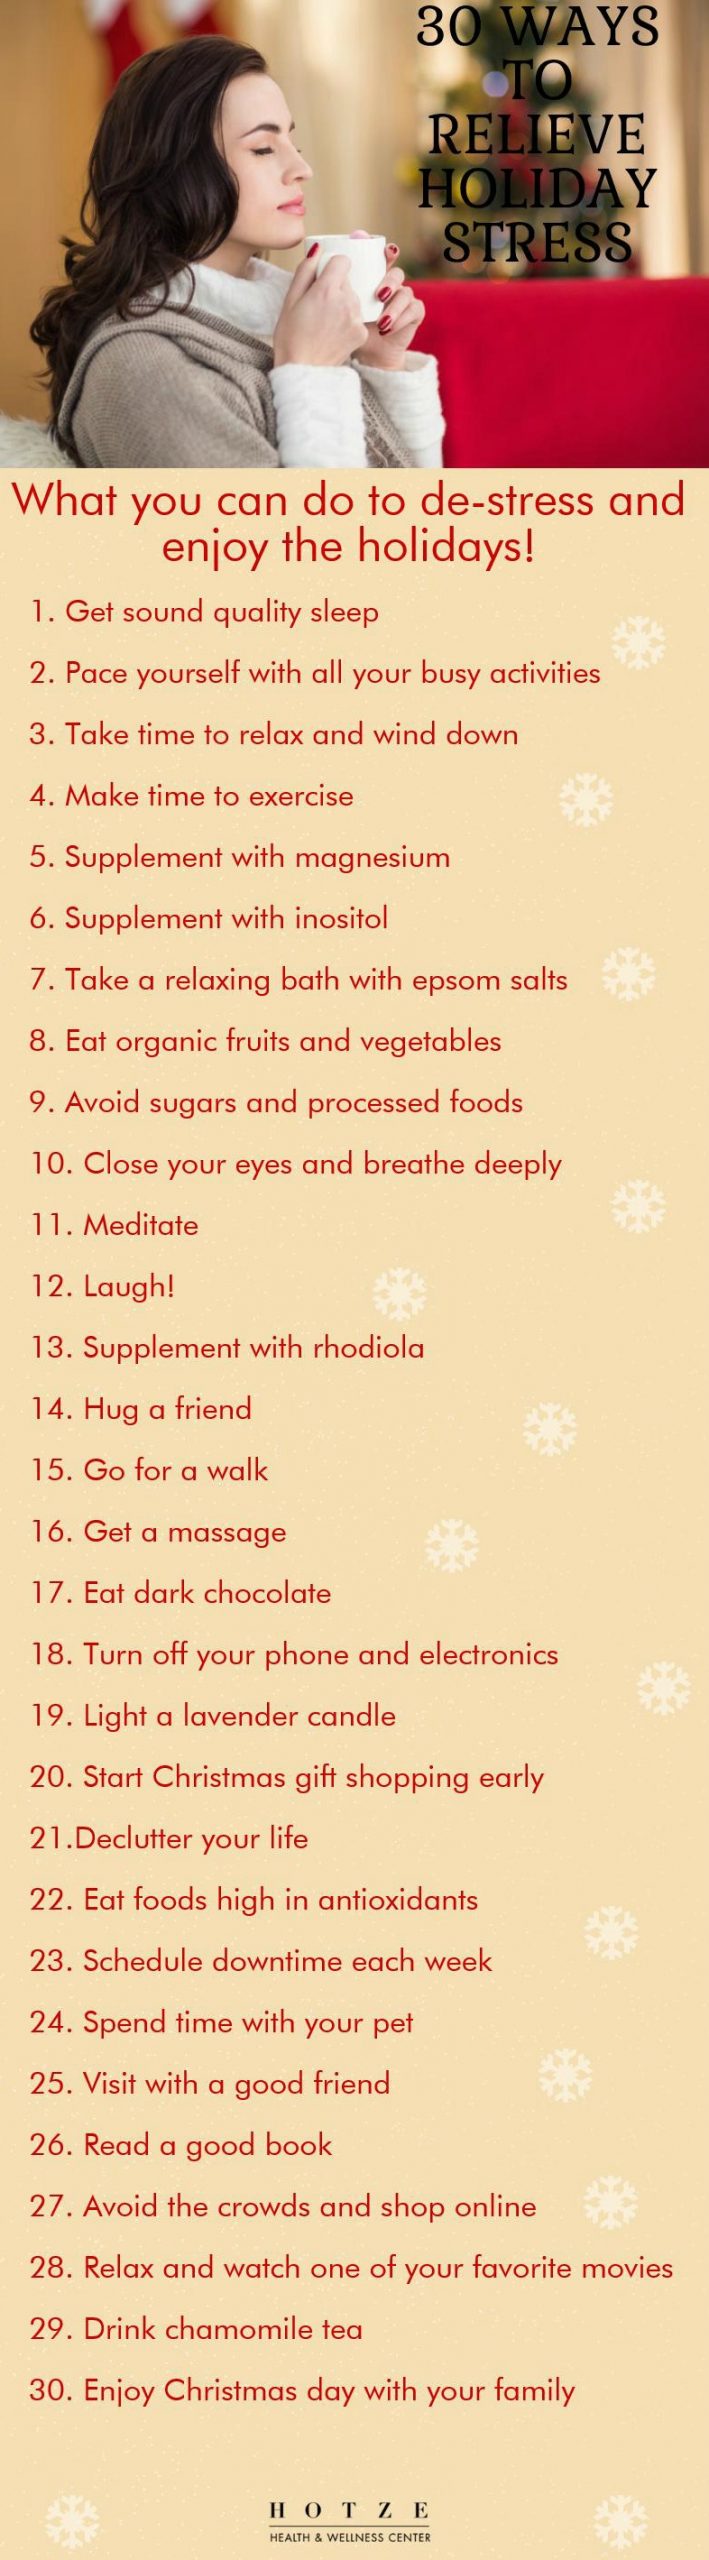 30 Ways to Relieve Holiday Stress